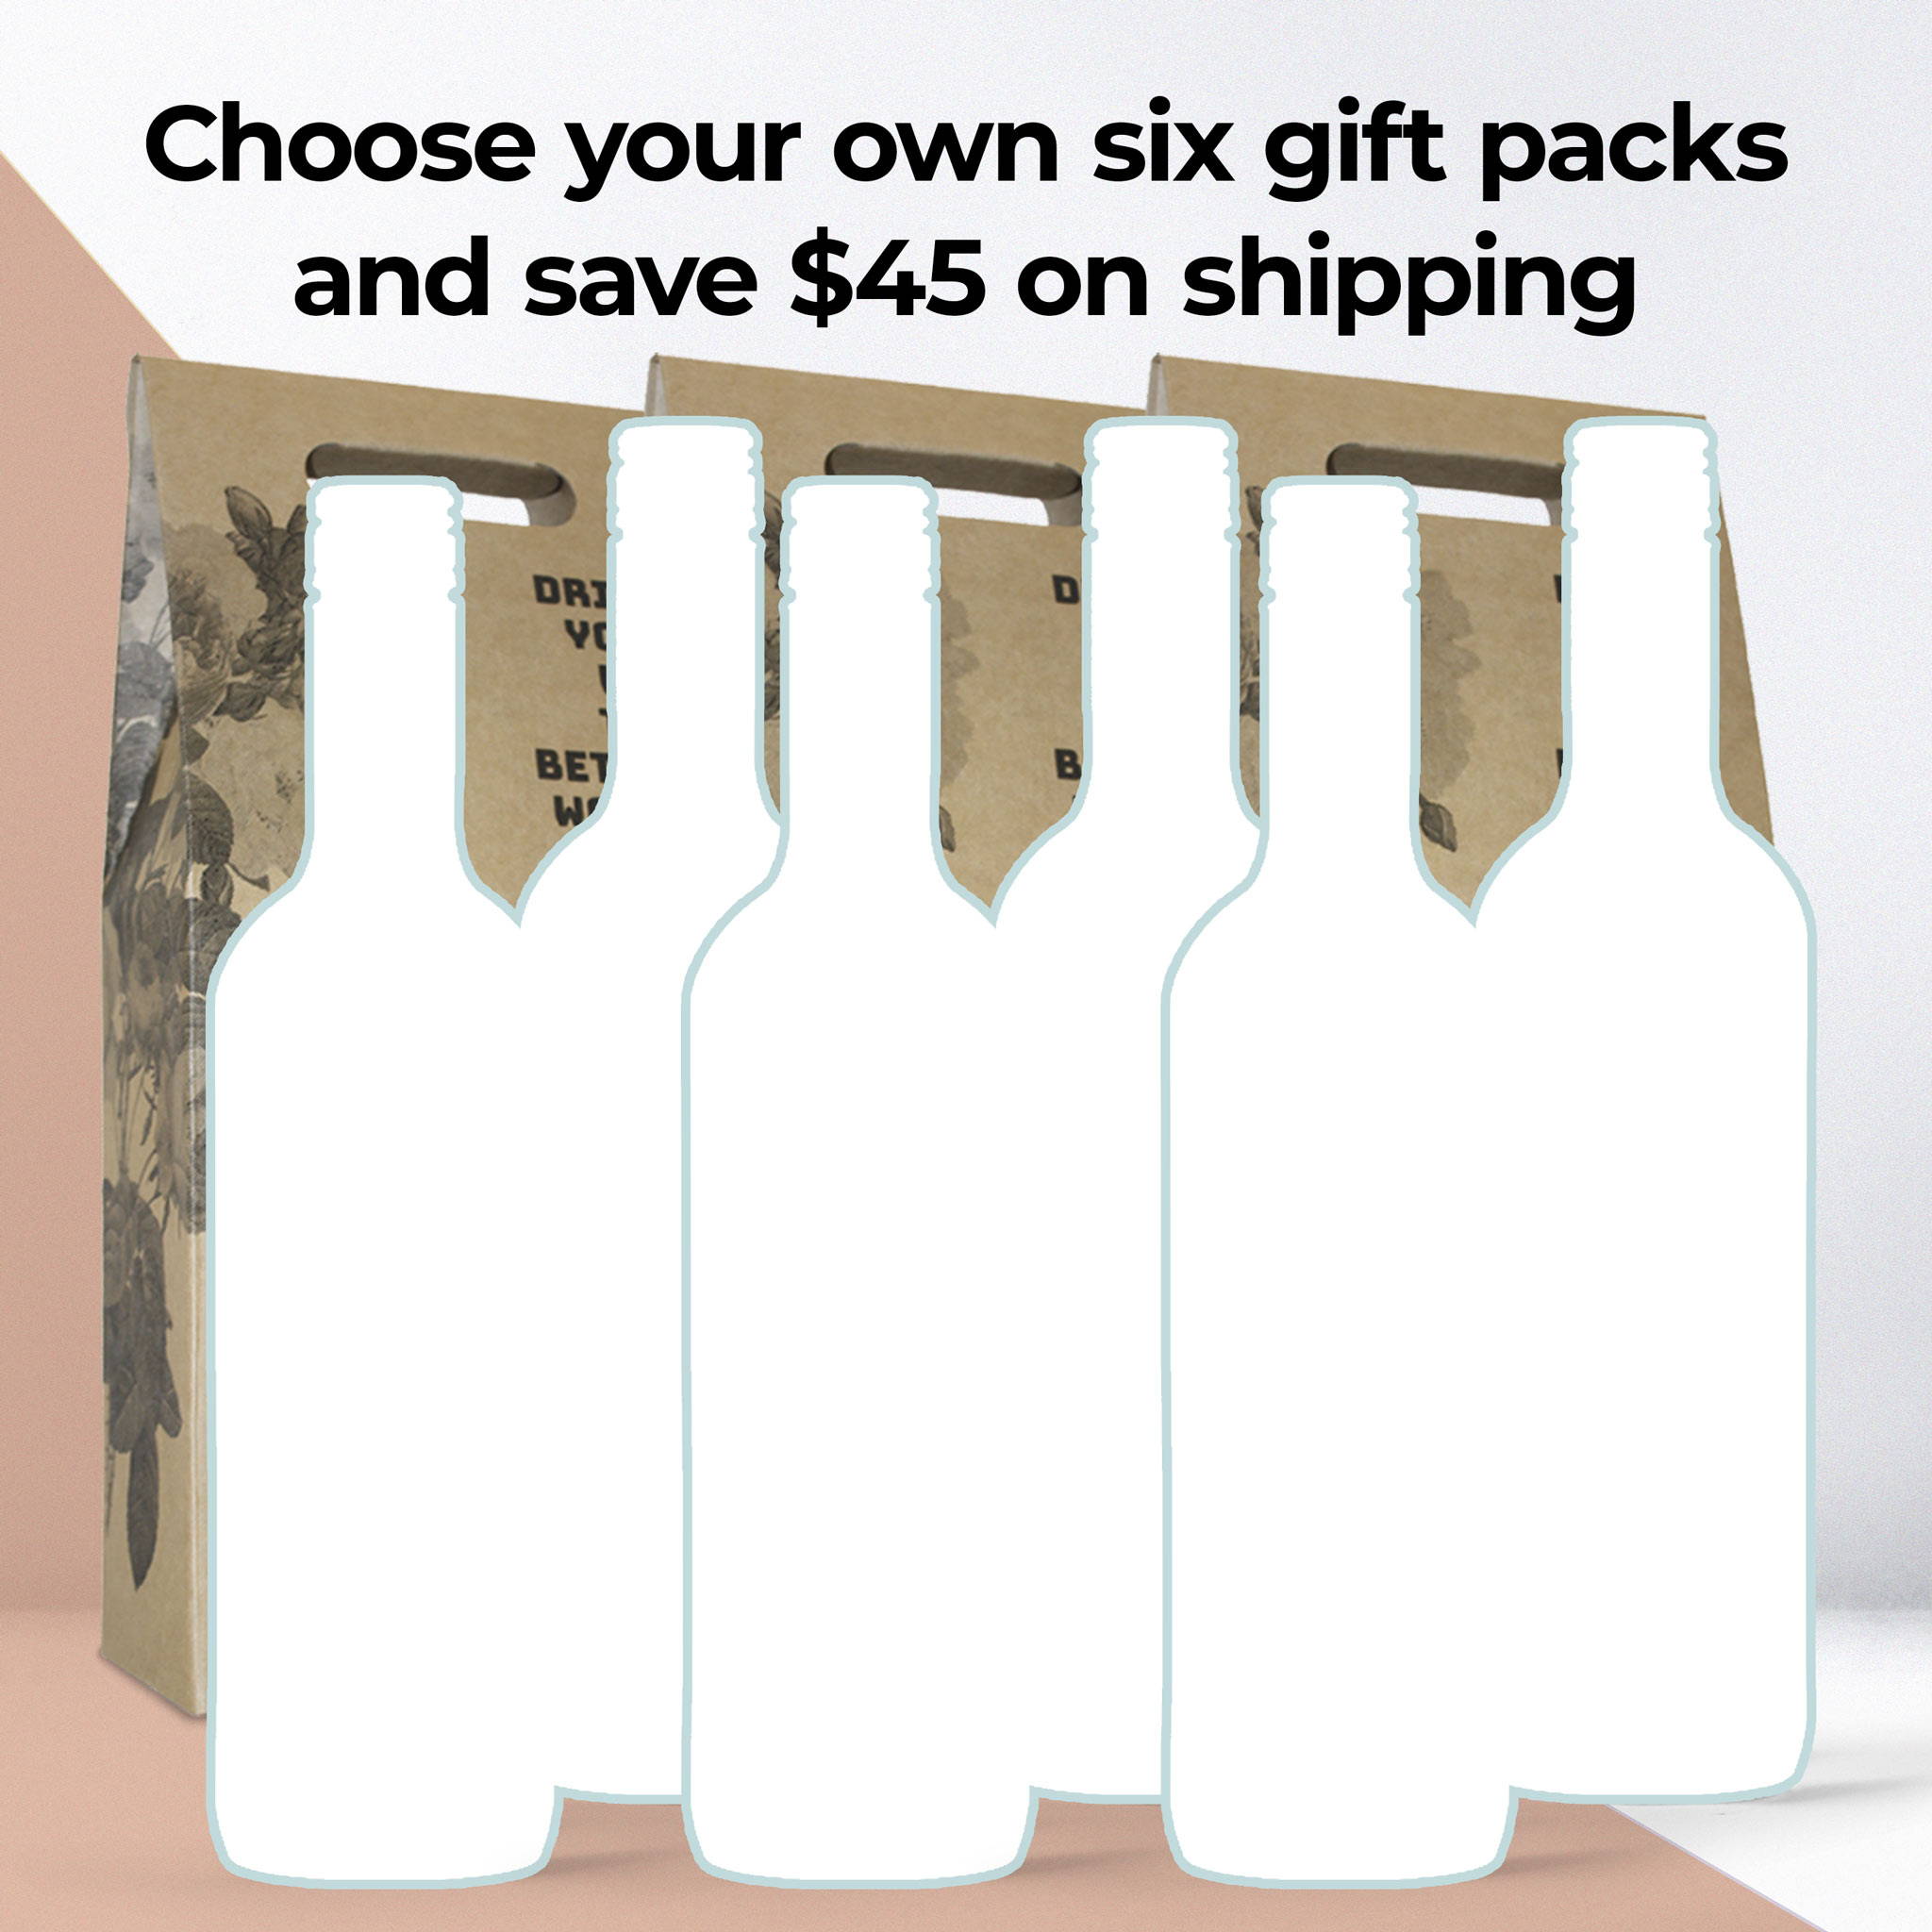 Choose Your Own Six Gift Packs